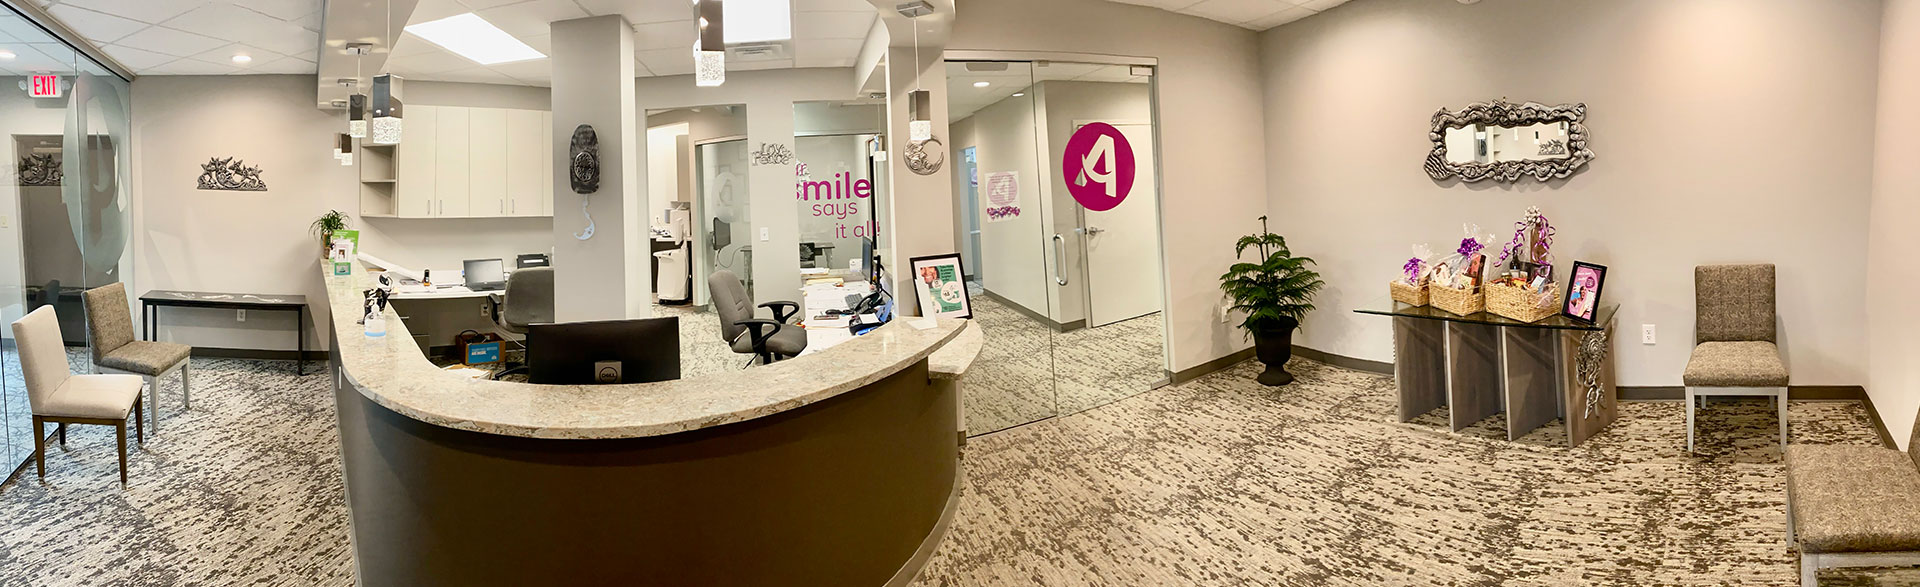 Arsmiles Family and Cosmetic Dentistry front desk